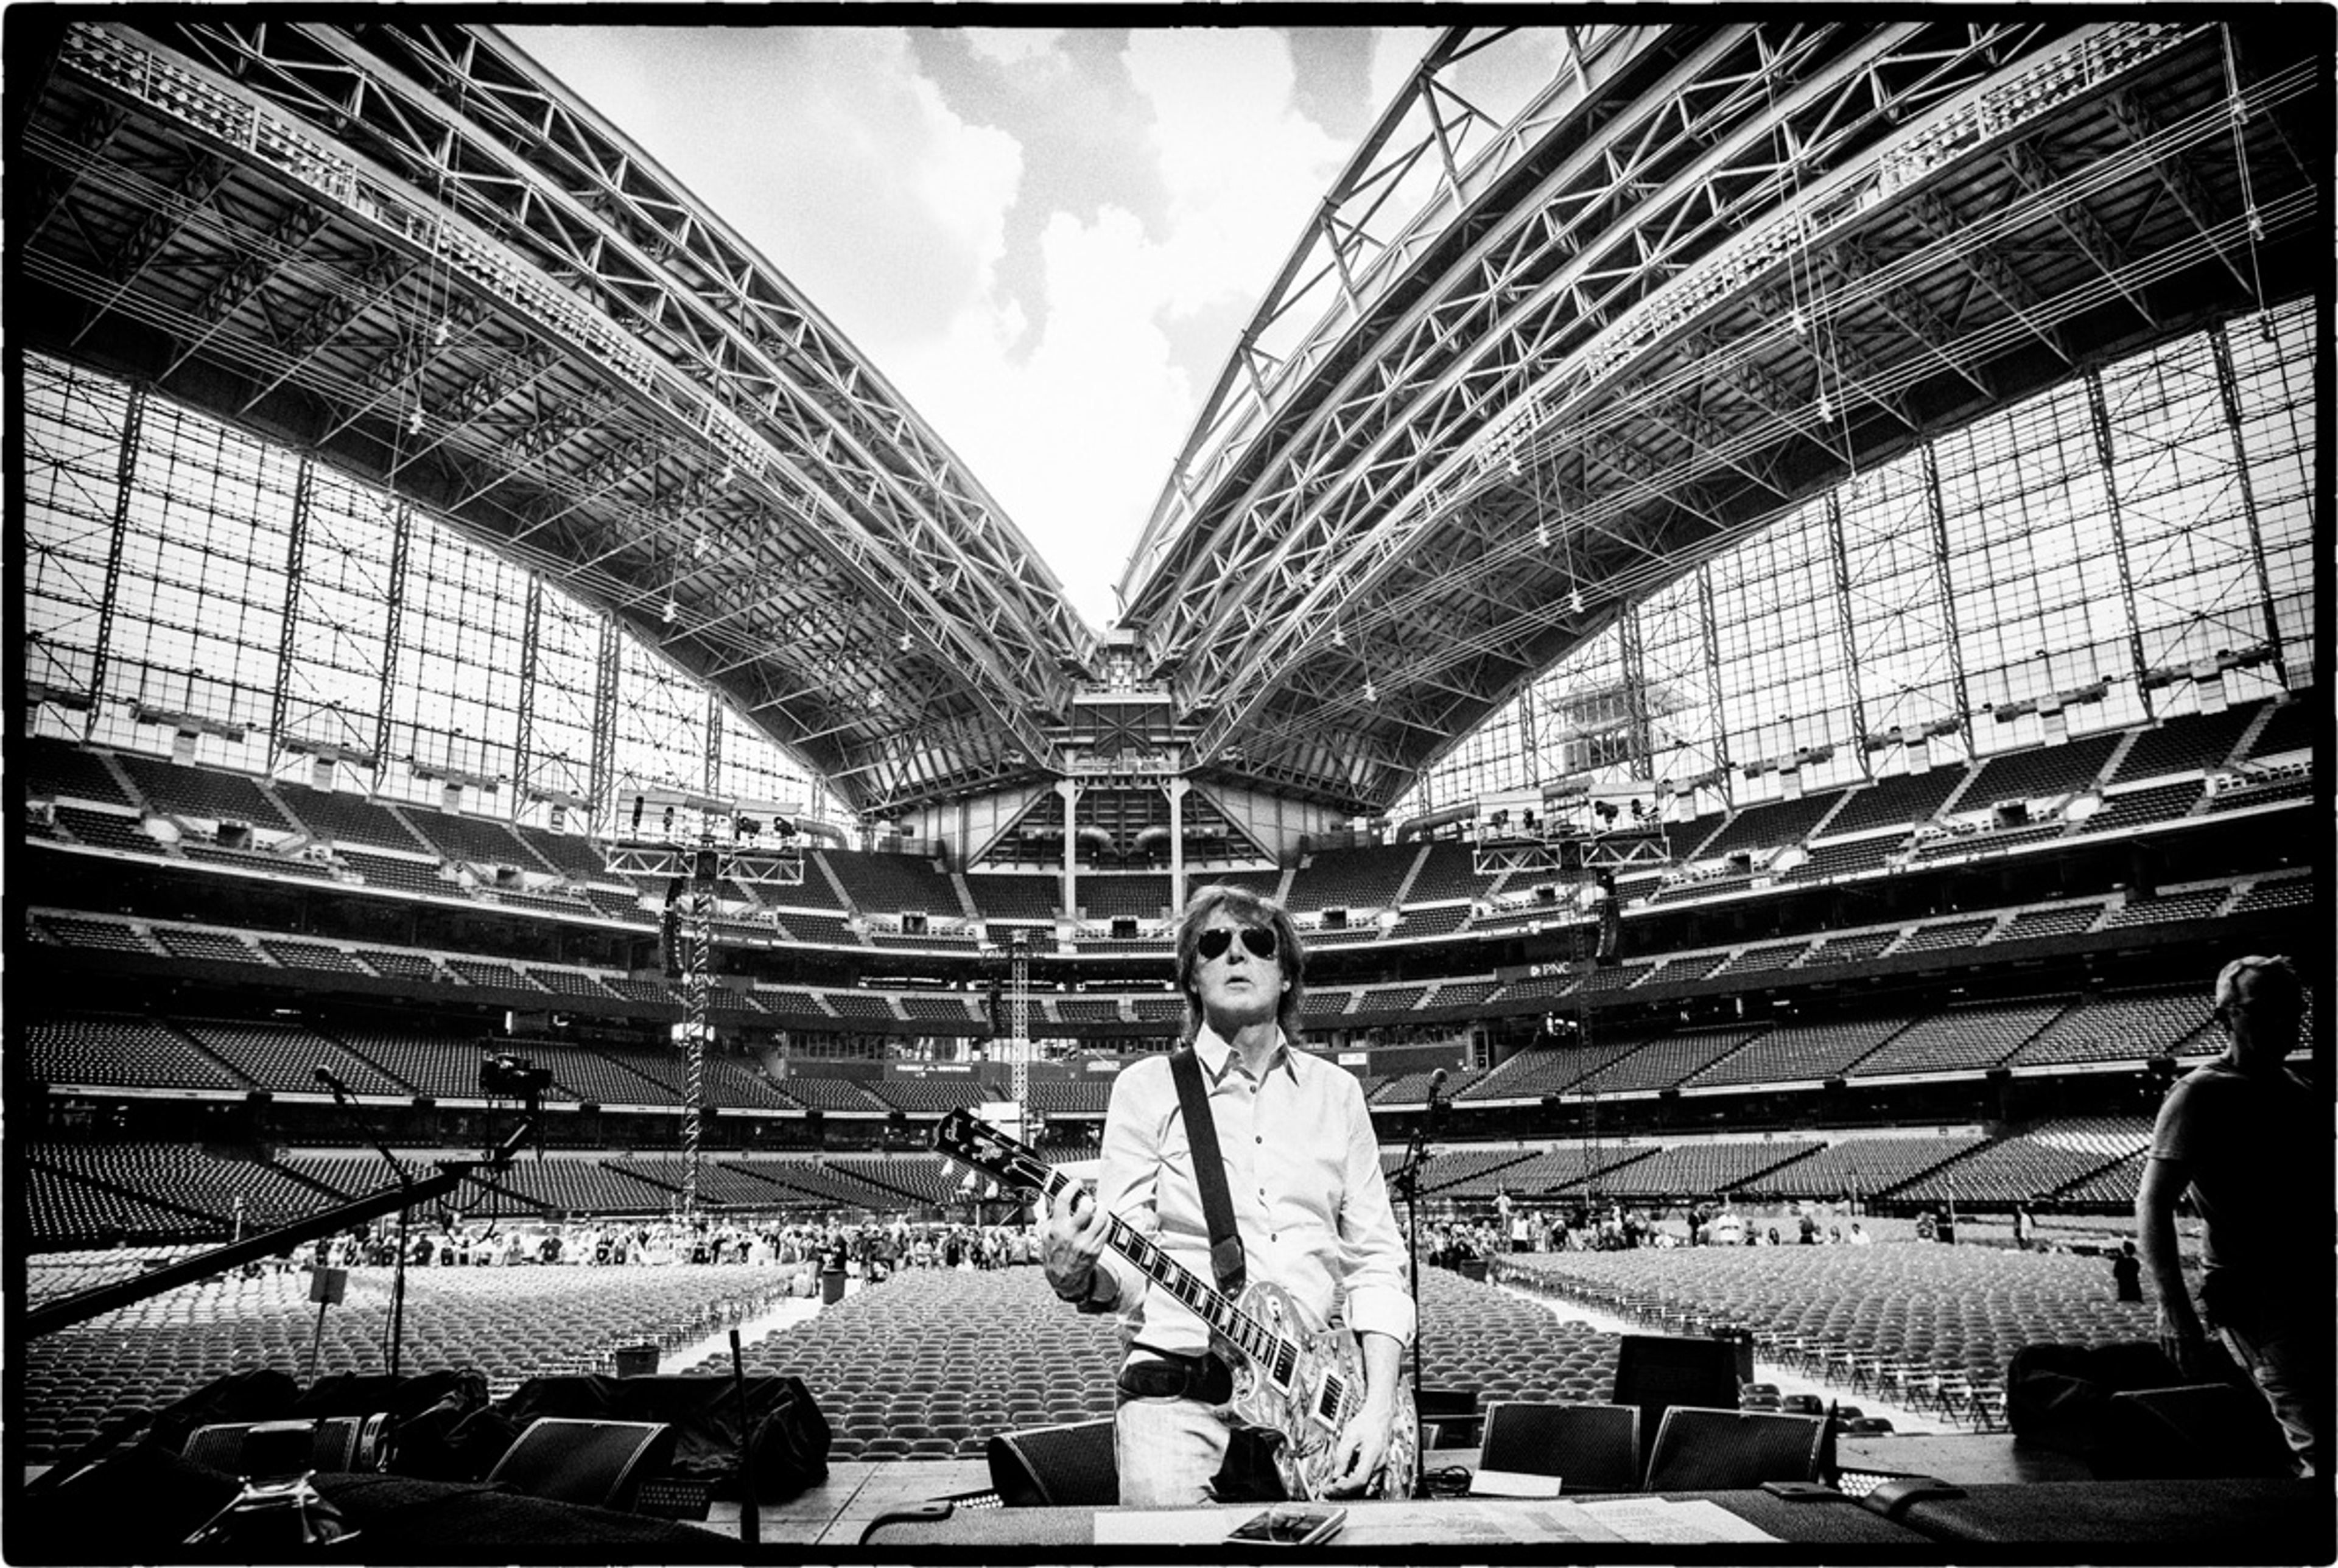 Paul at soundcheck, Miller Park, Milwaukee, 16th July 2013